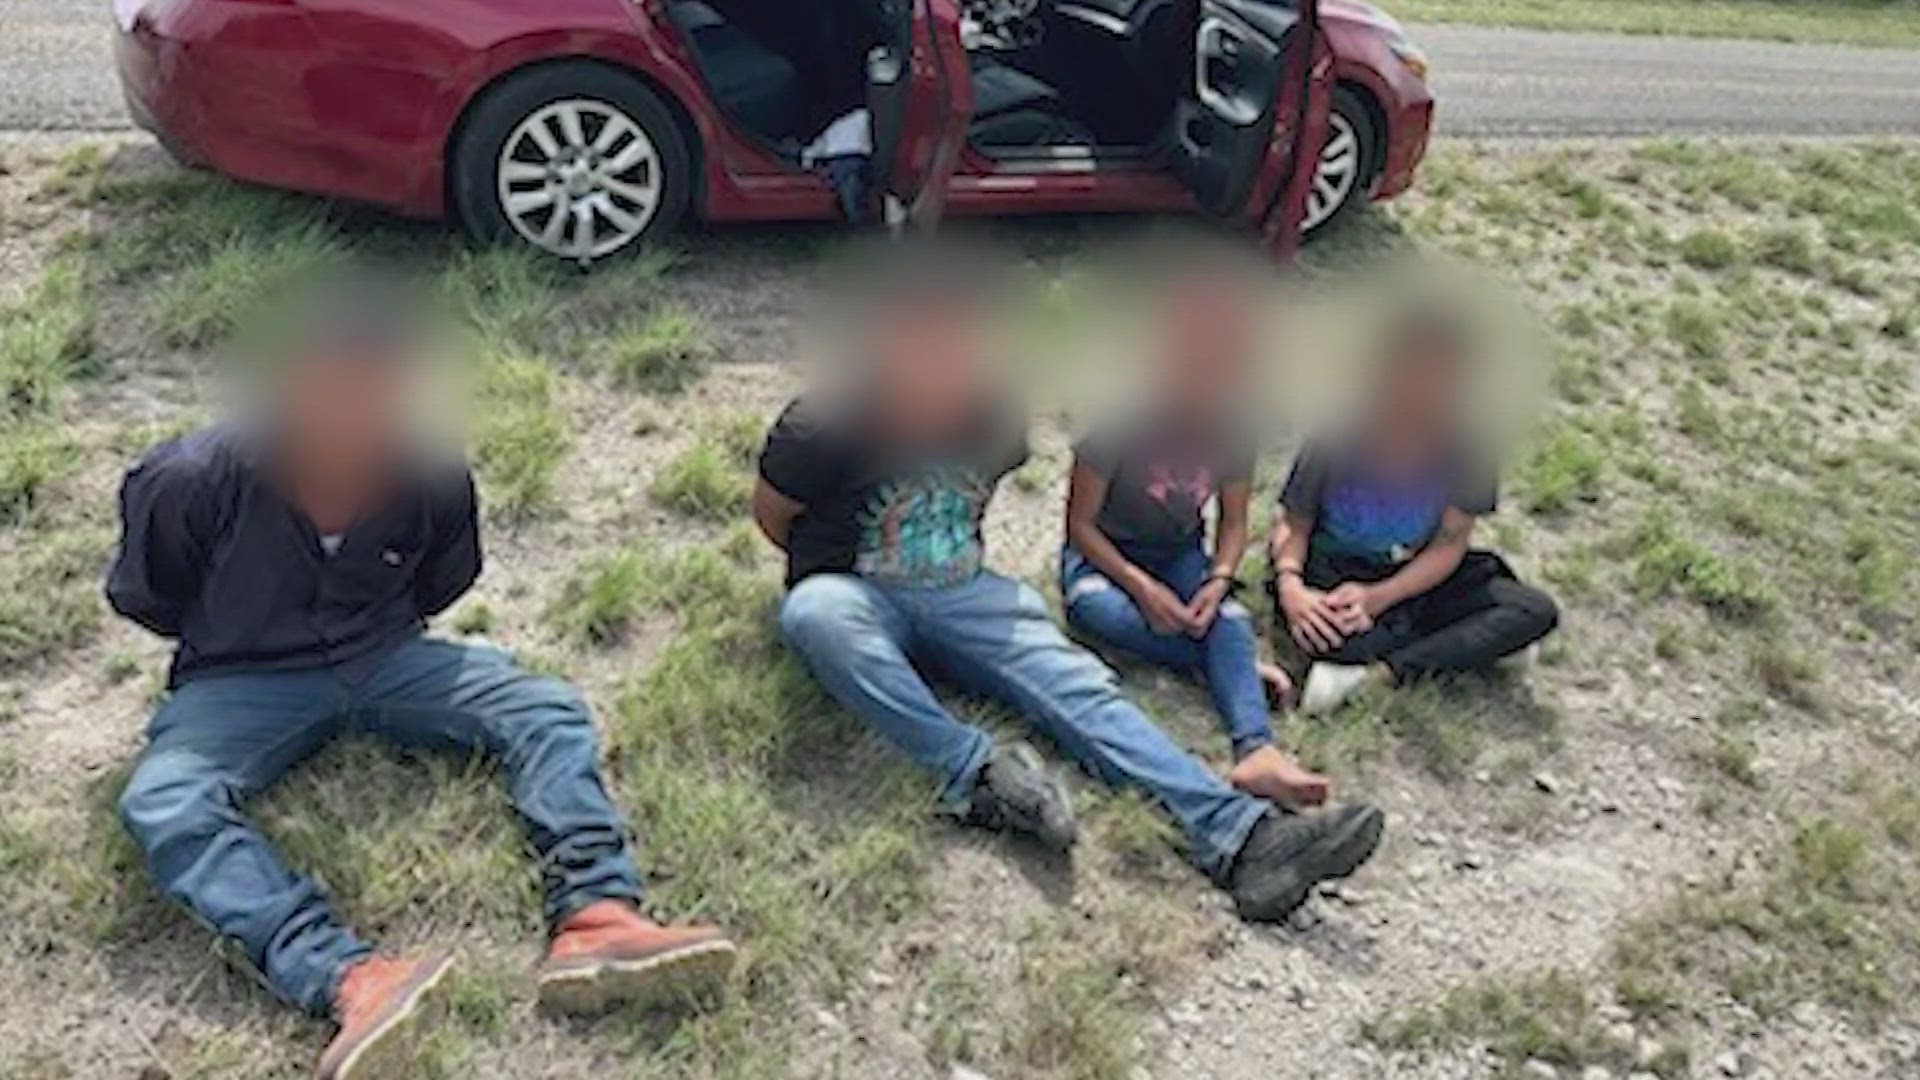 The sheriff's office said Brandan Gracia was being paid to pick up four migrants in the county and then drive them to Houston.